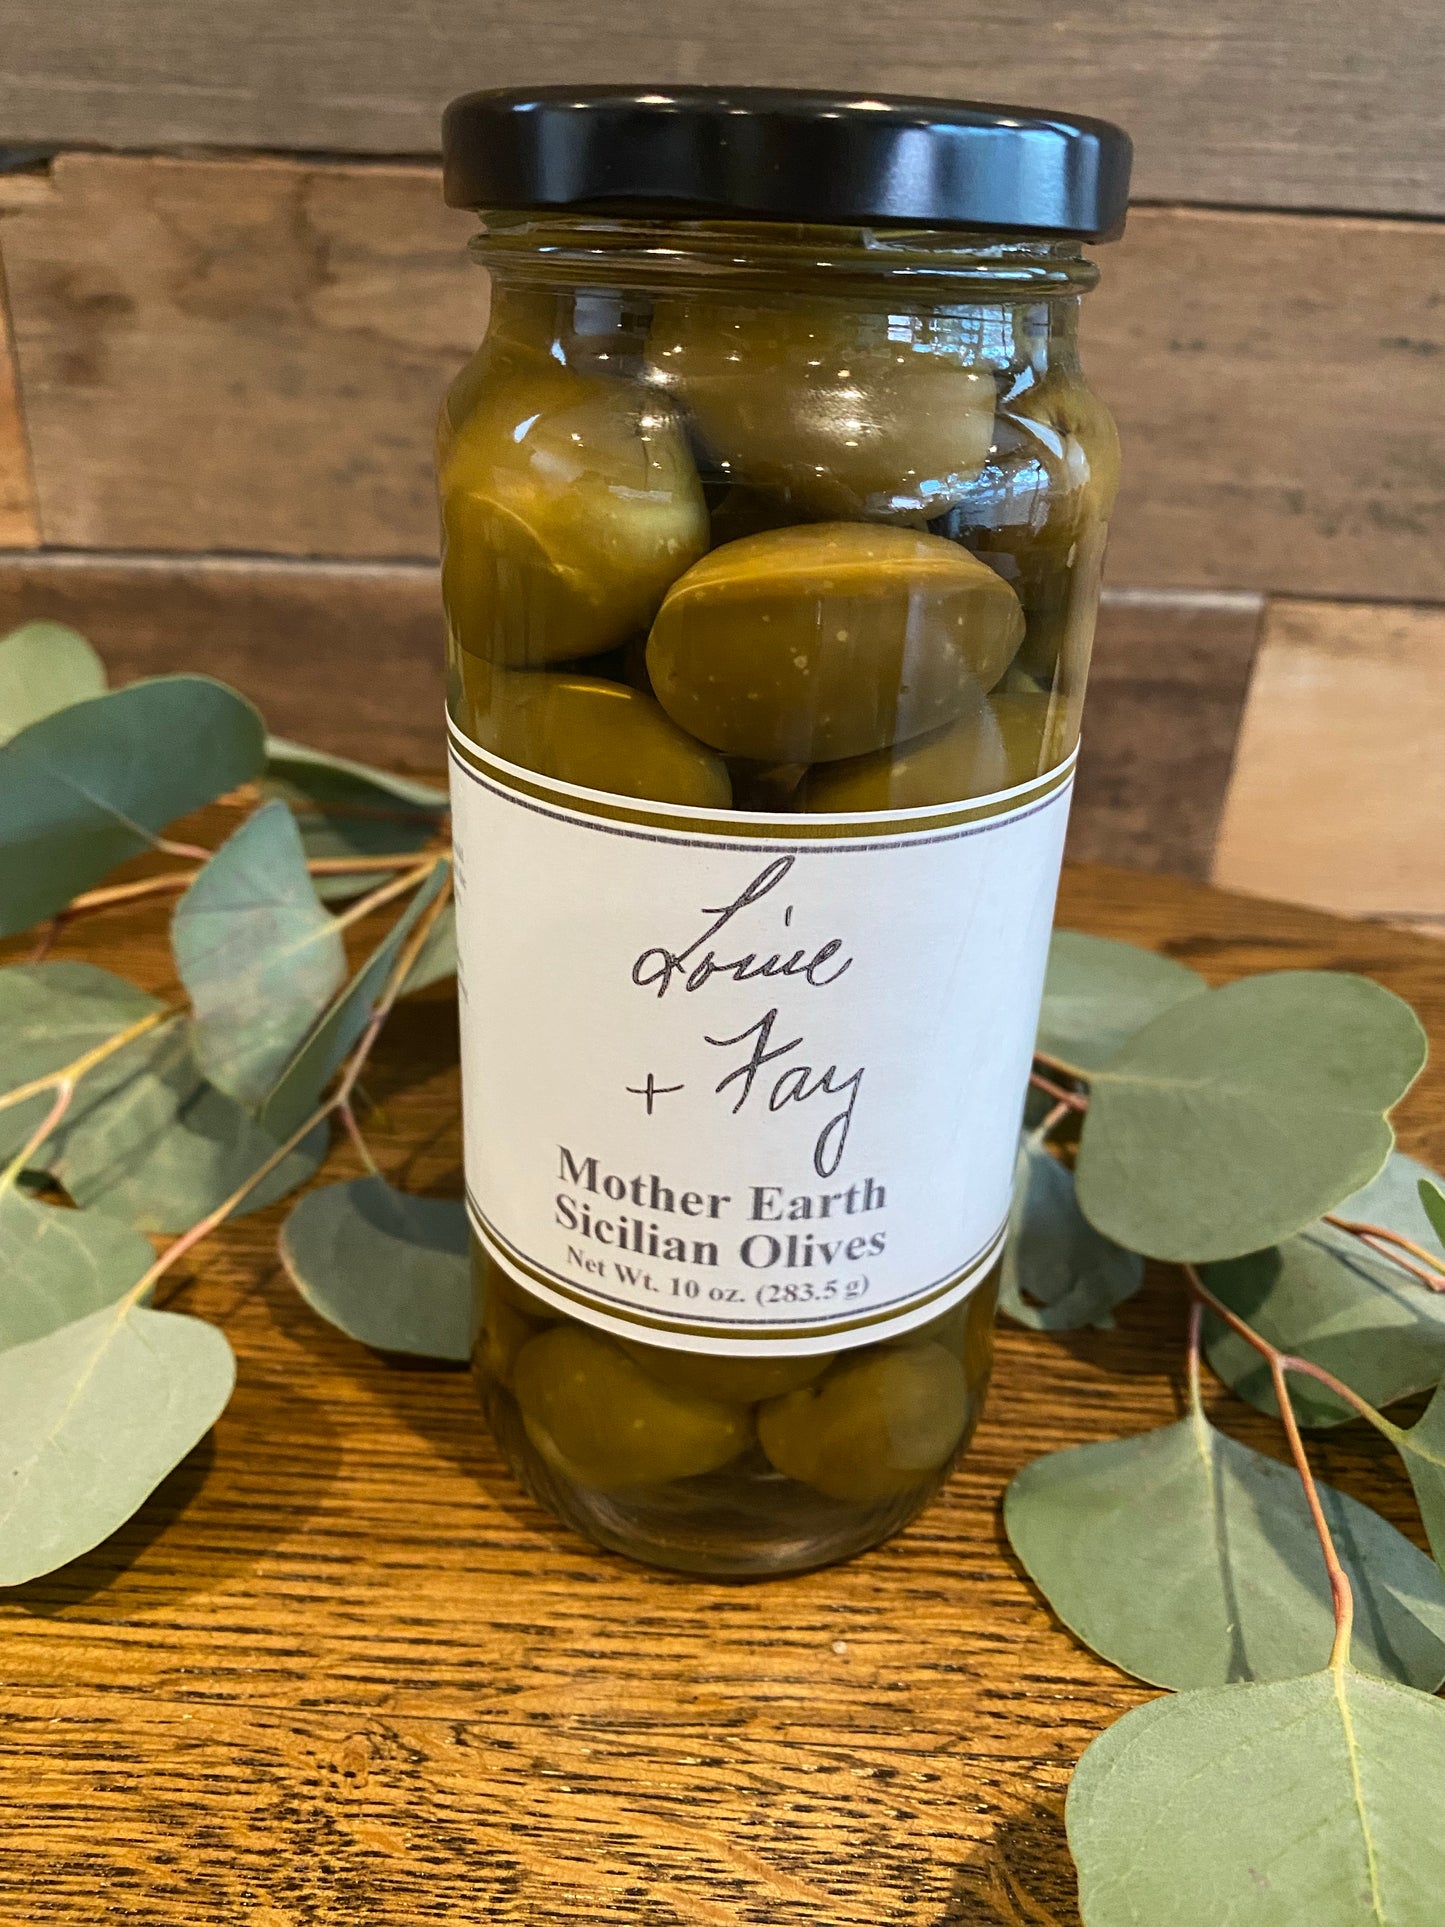 Mother Earth Sicilian Olives  no p